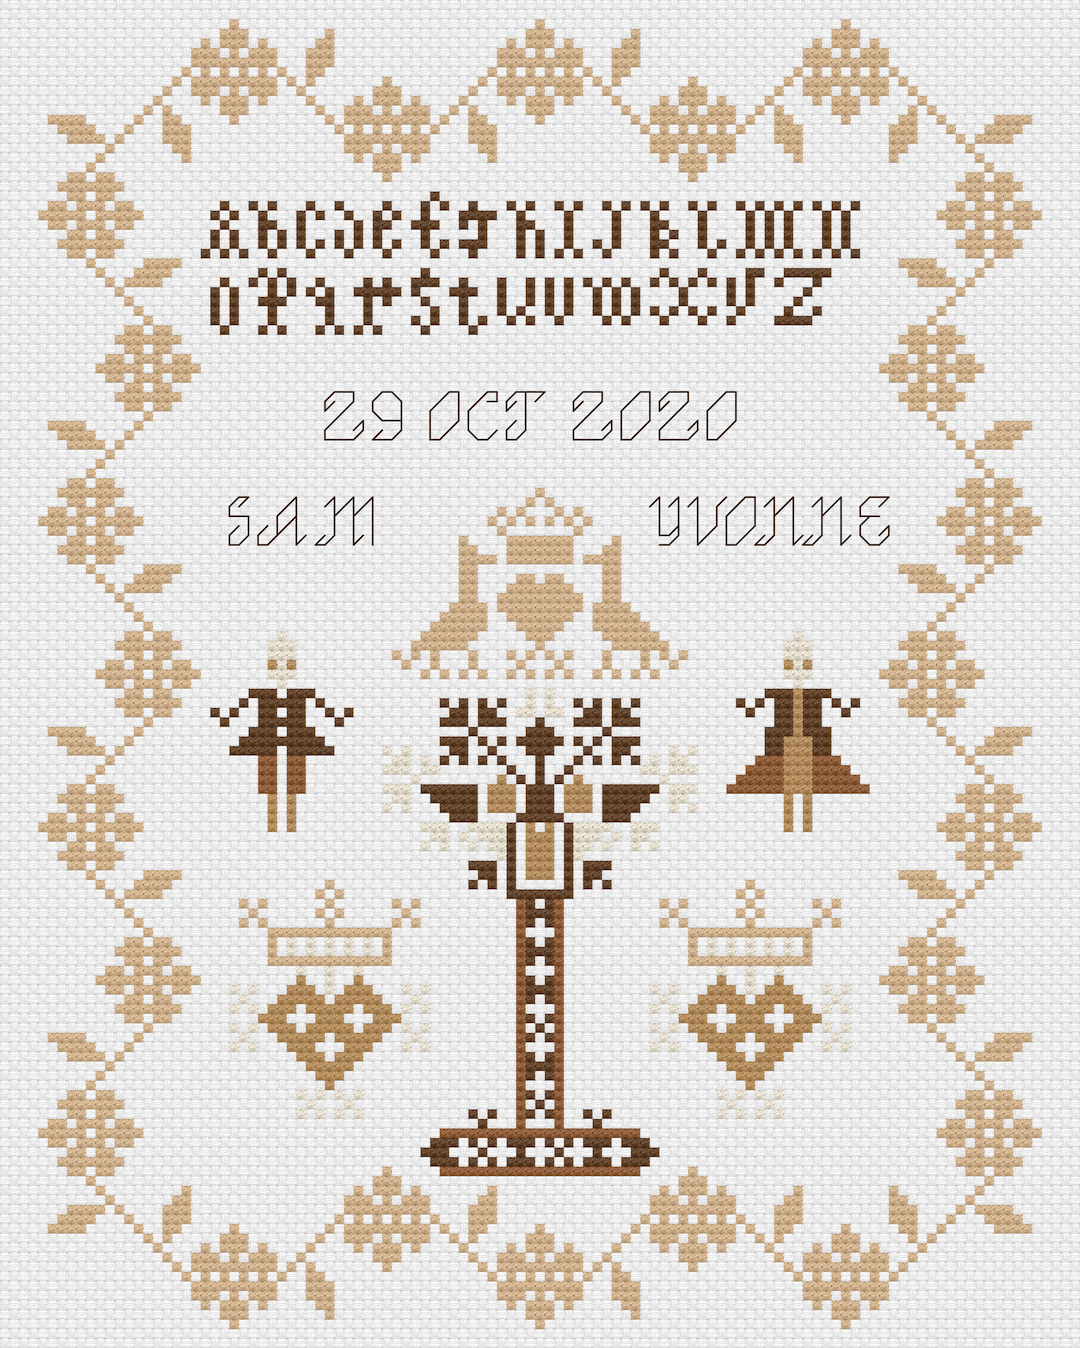 King & Queen Hearts Wedding Sampler Cross Stitch Kit by Florashell 